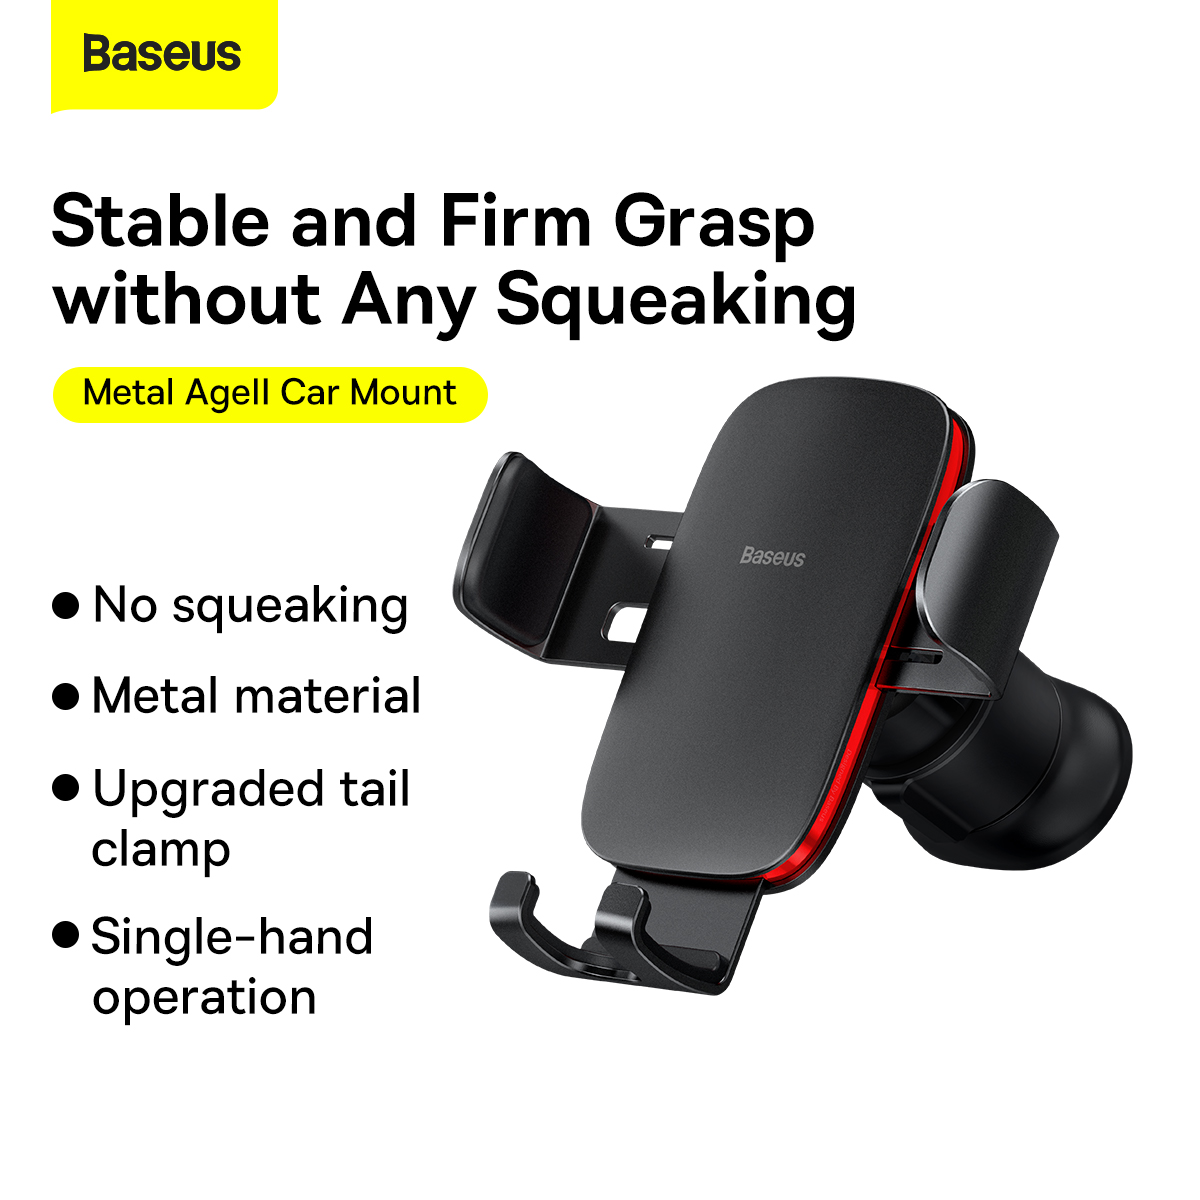 Baseus-Metal-Age-II-New-Gravity-Car-Mount-Phone-Holder-Shockproof-Air-Outlet-Stand-for-47-67-inch-Ph-1932910-1